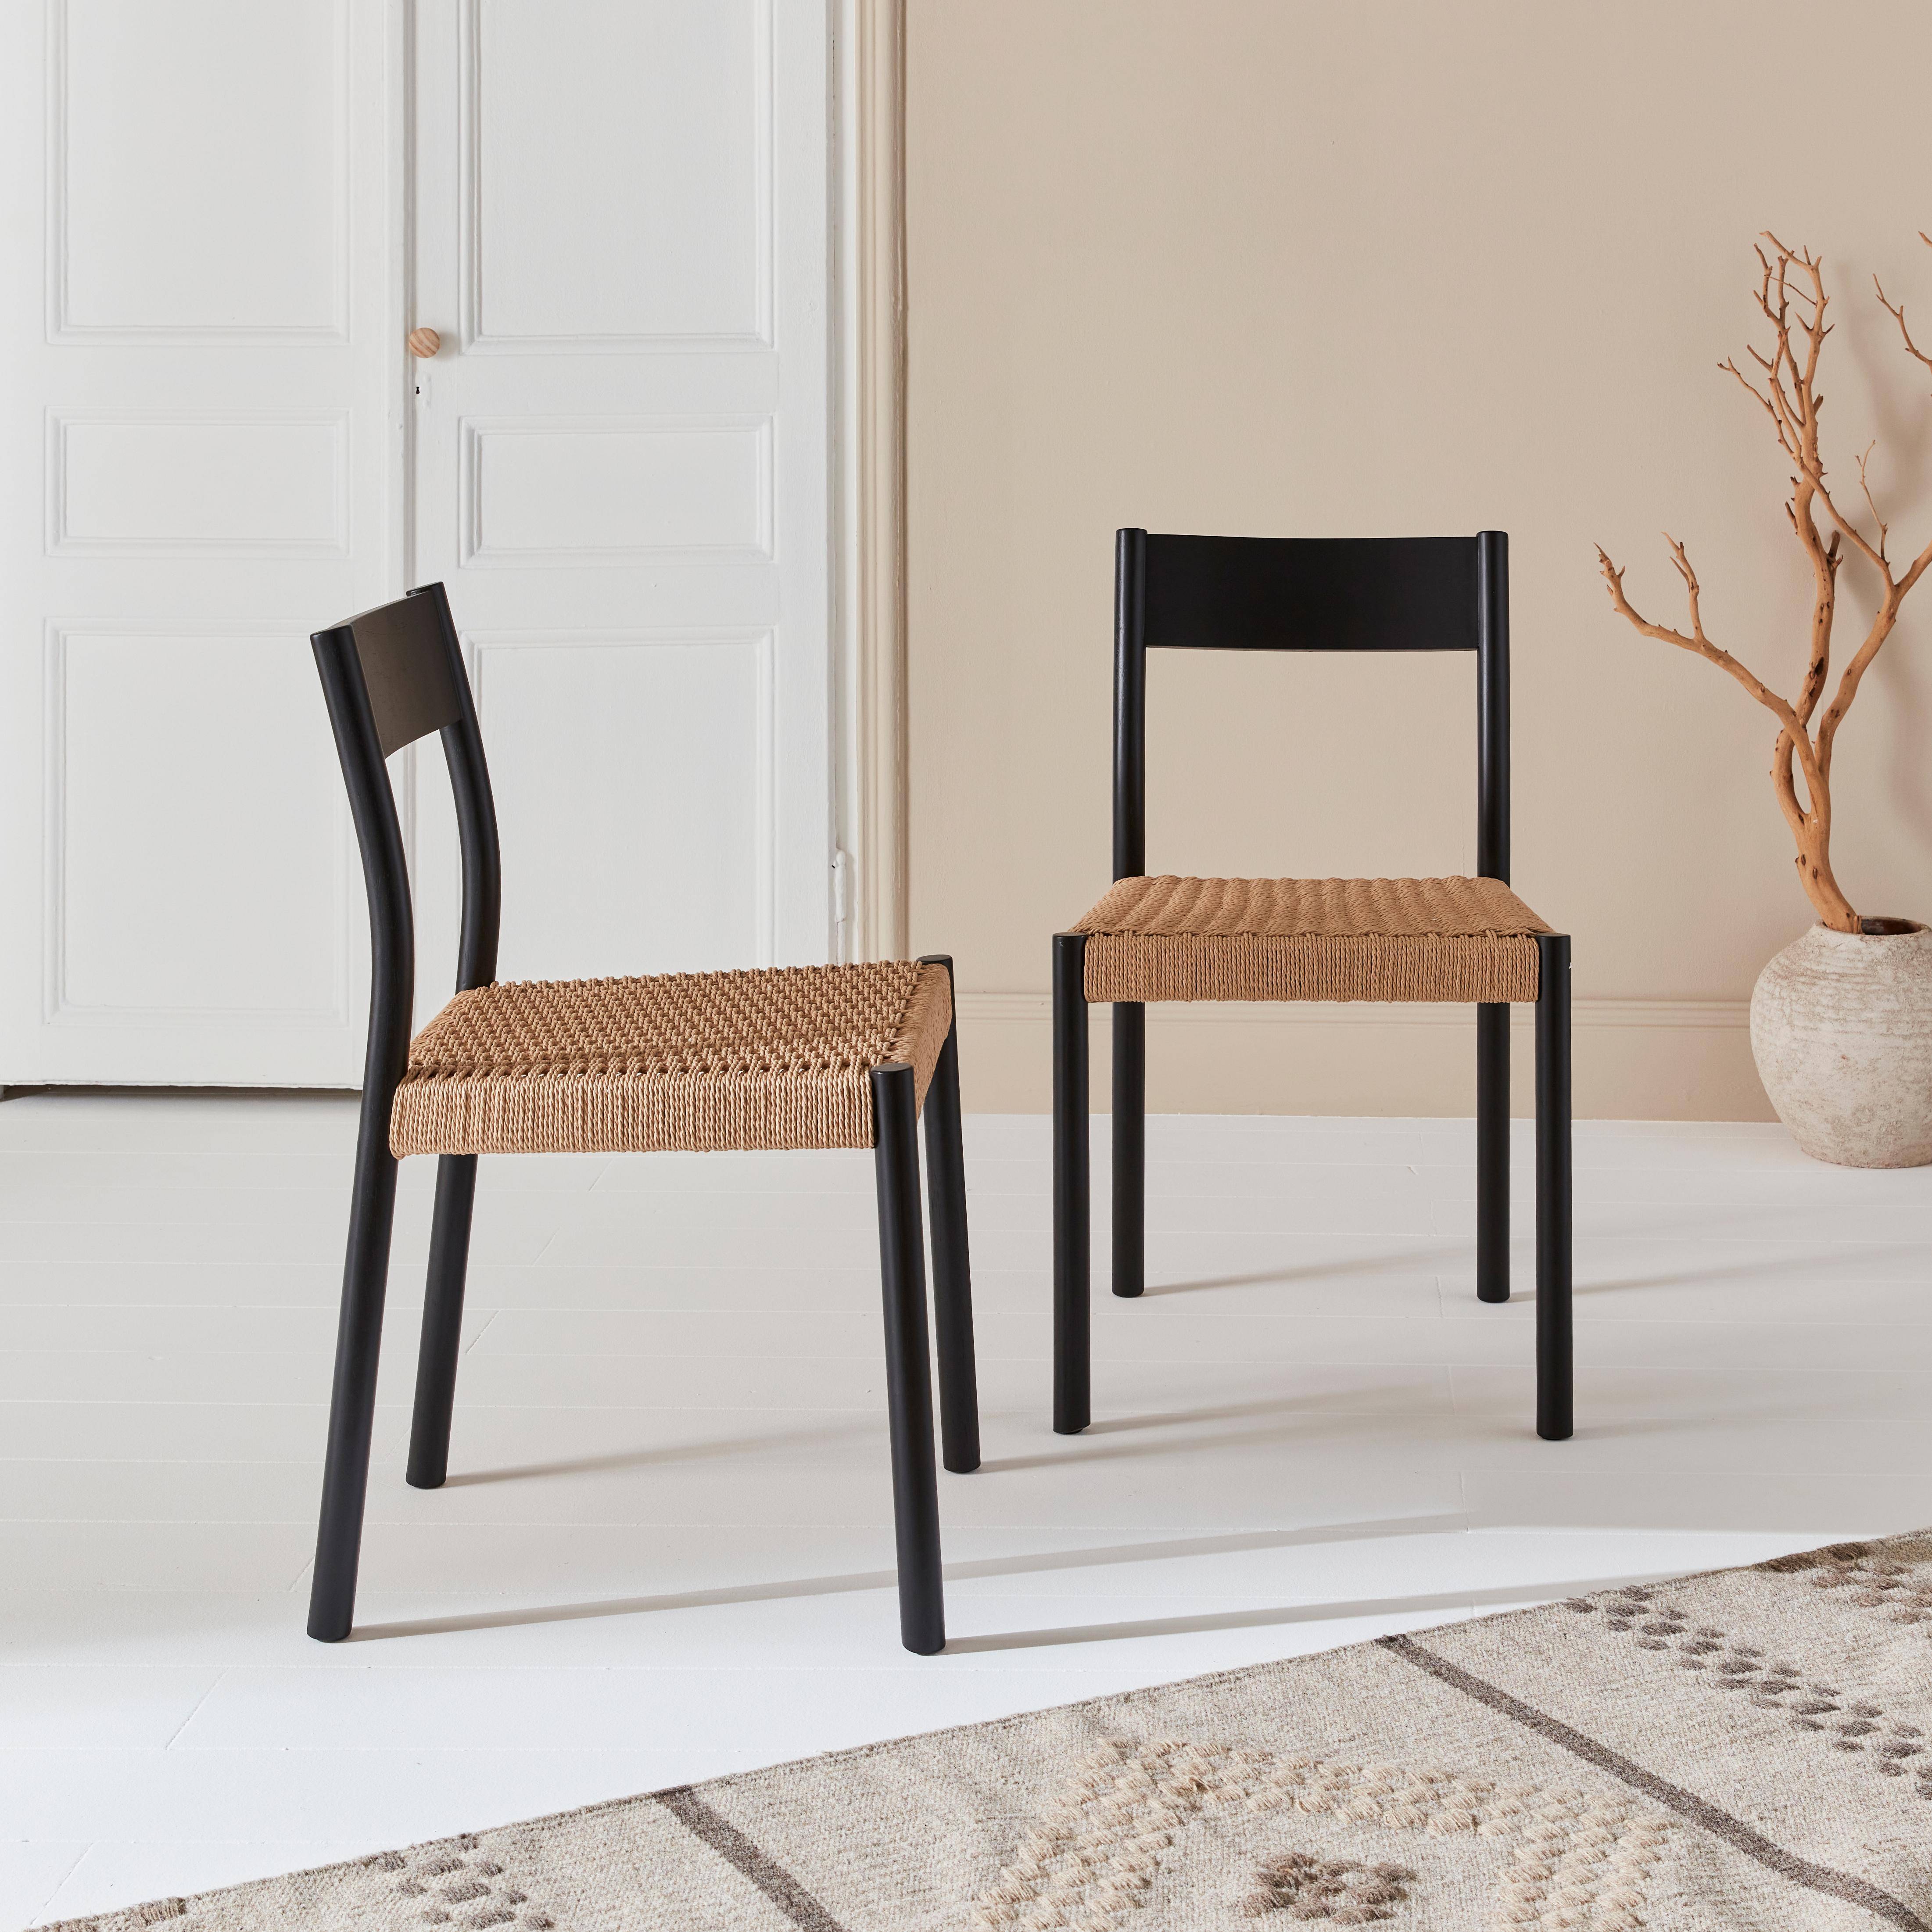 Pair of timeless design Wood and Rope Dining Room chairs, L49.5 x W53 x H82 cm, black Photo2